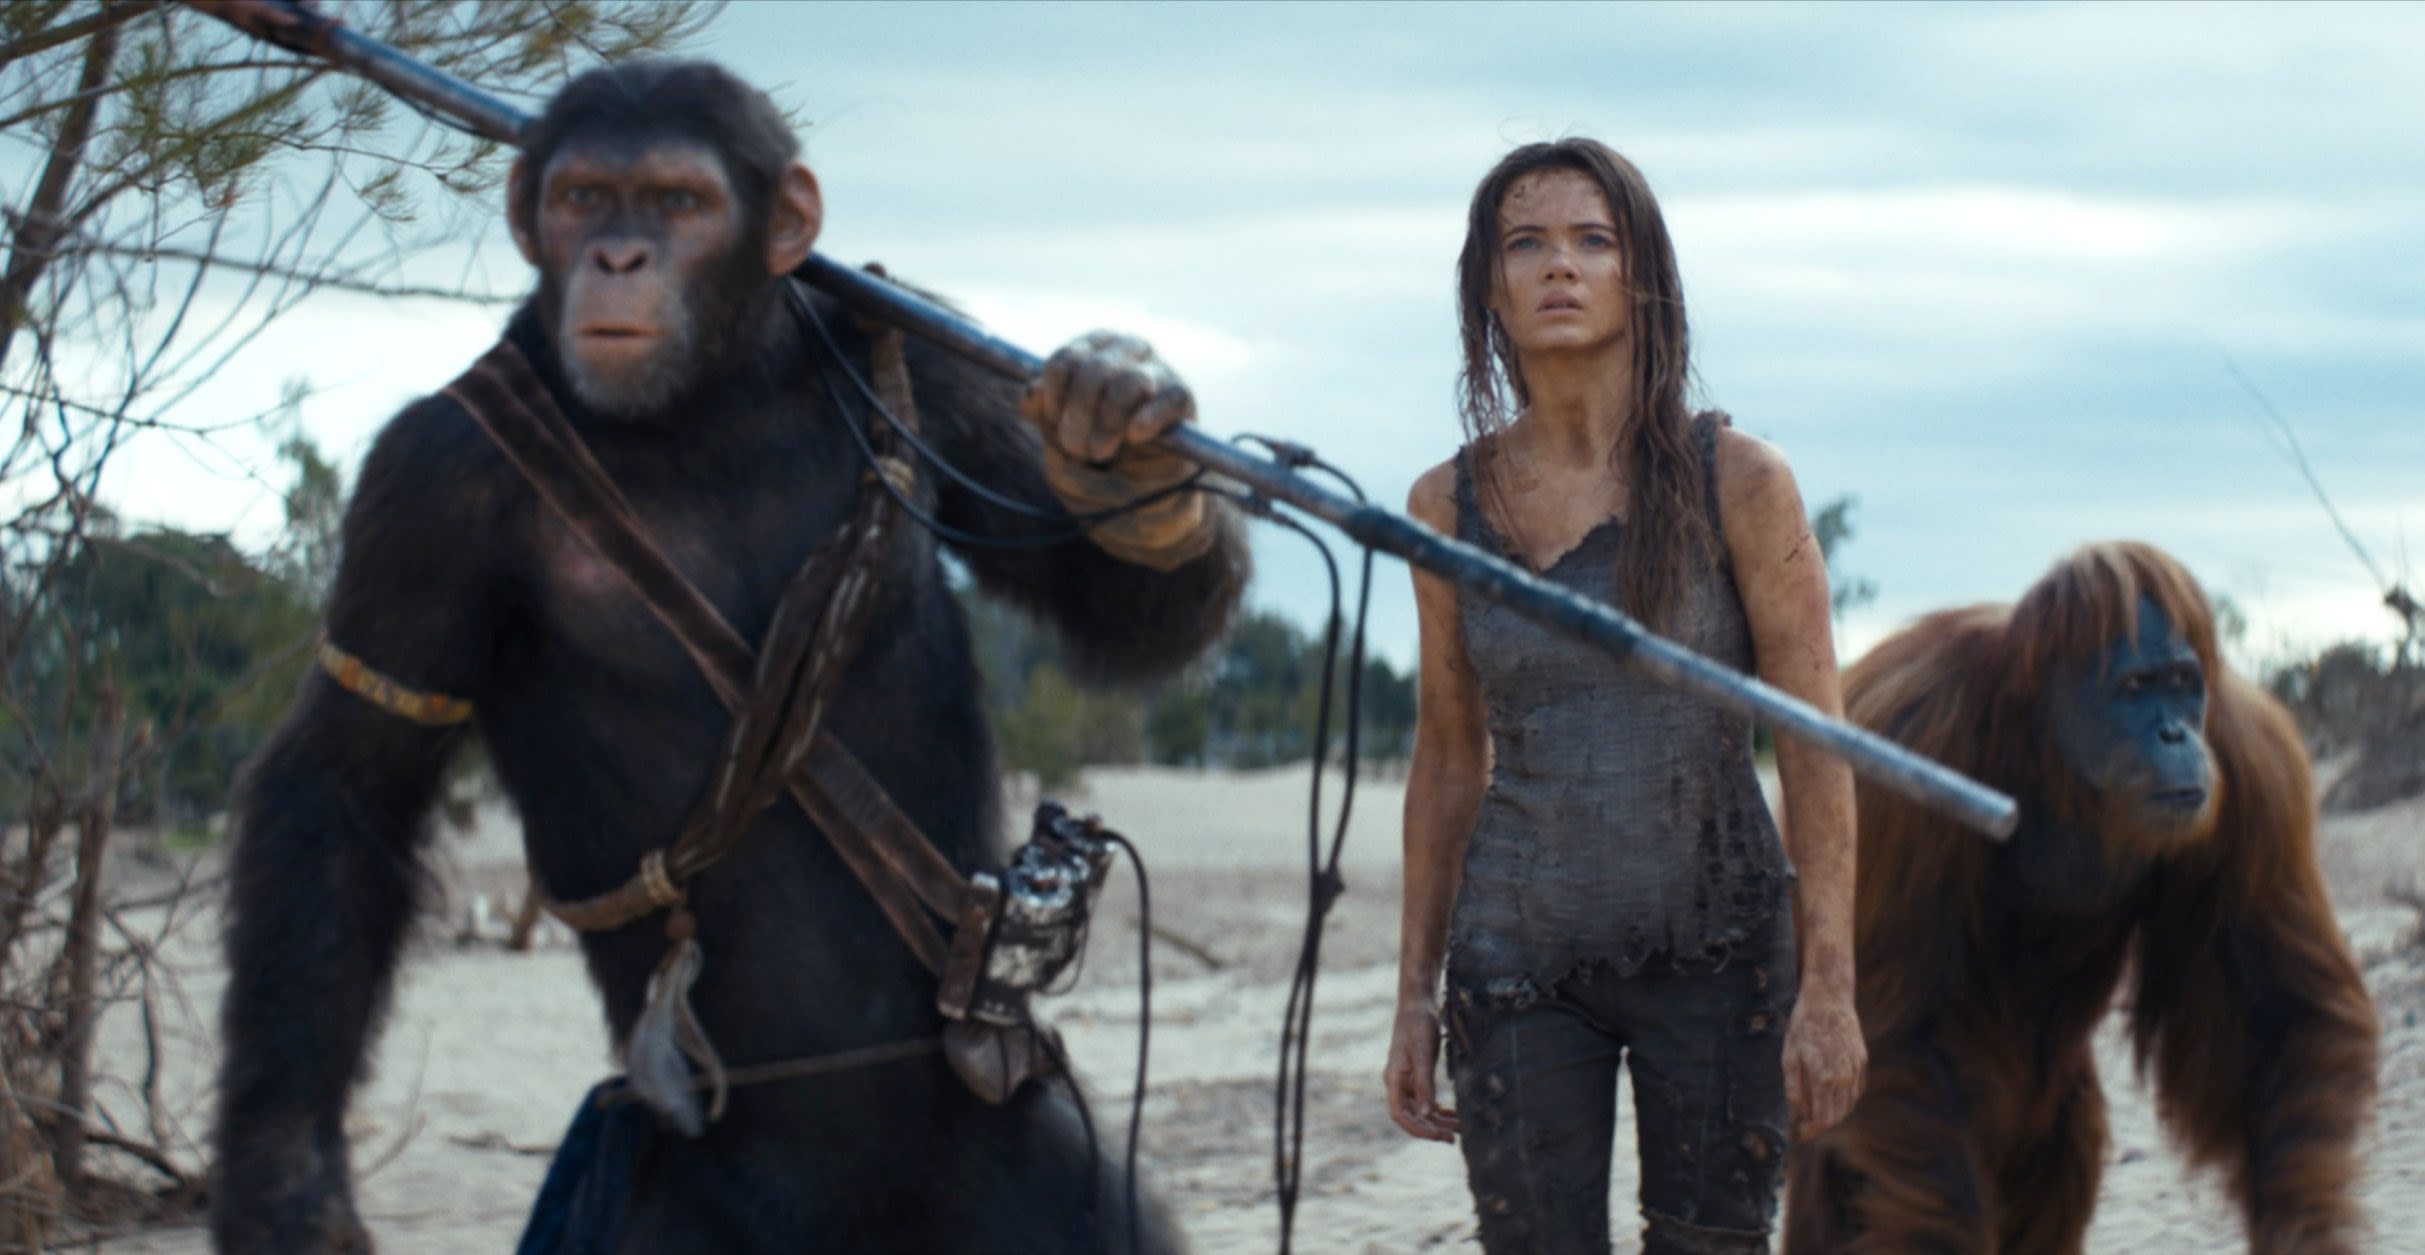 ‘Kingdom Of The Planet Of The Apes’ Beats Chest To $58M+ Opening — Monday AM Box Office Update